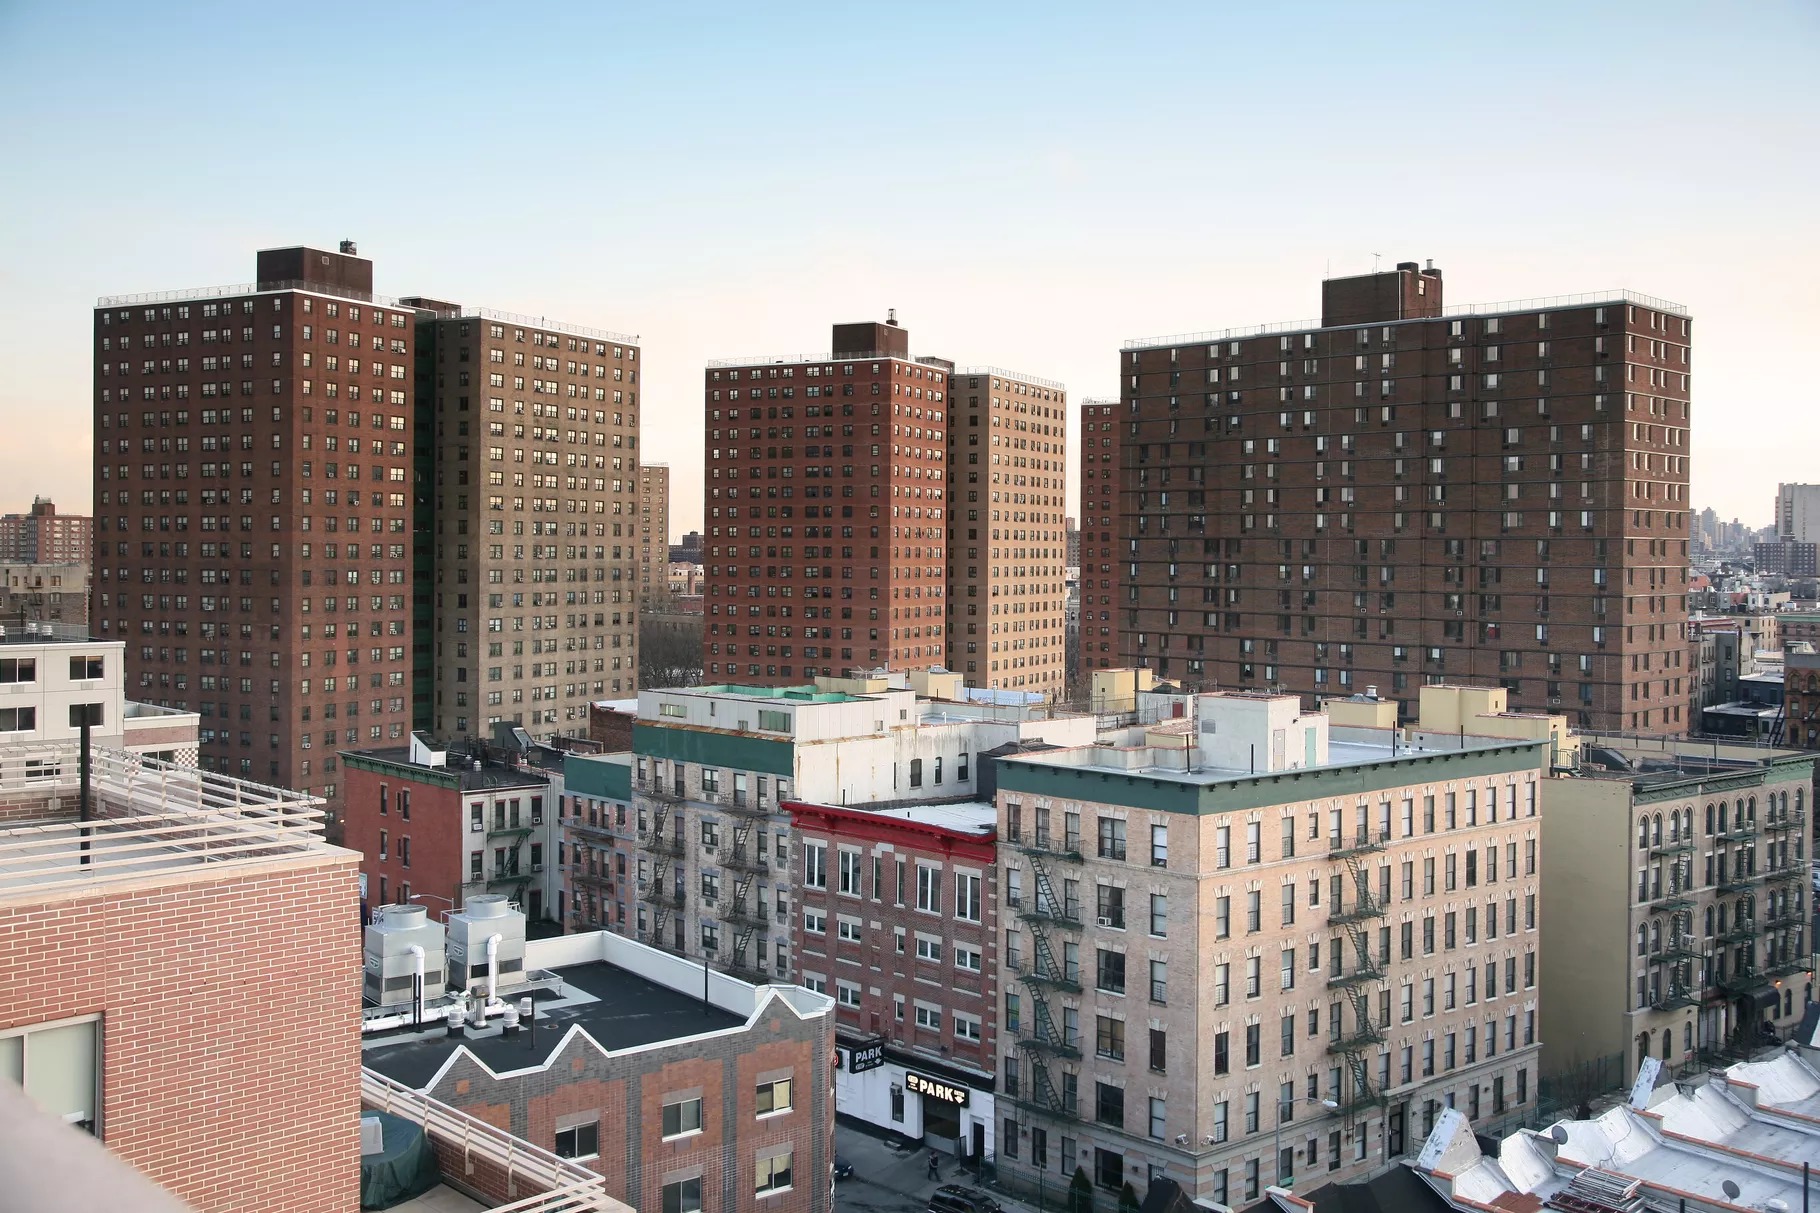 Three brown, high-rise public housing buildings loom over a handful of white low-rise apartment buildings in Manhattan.